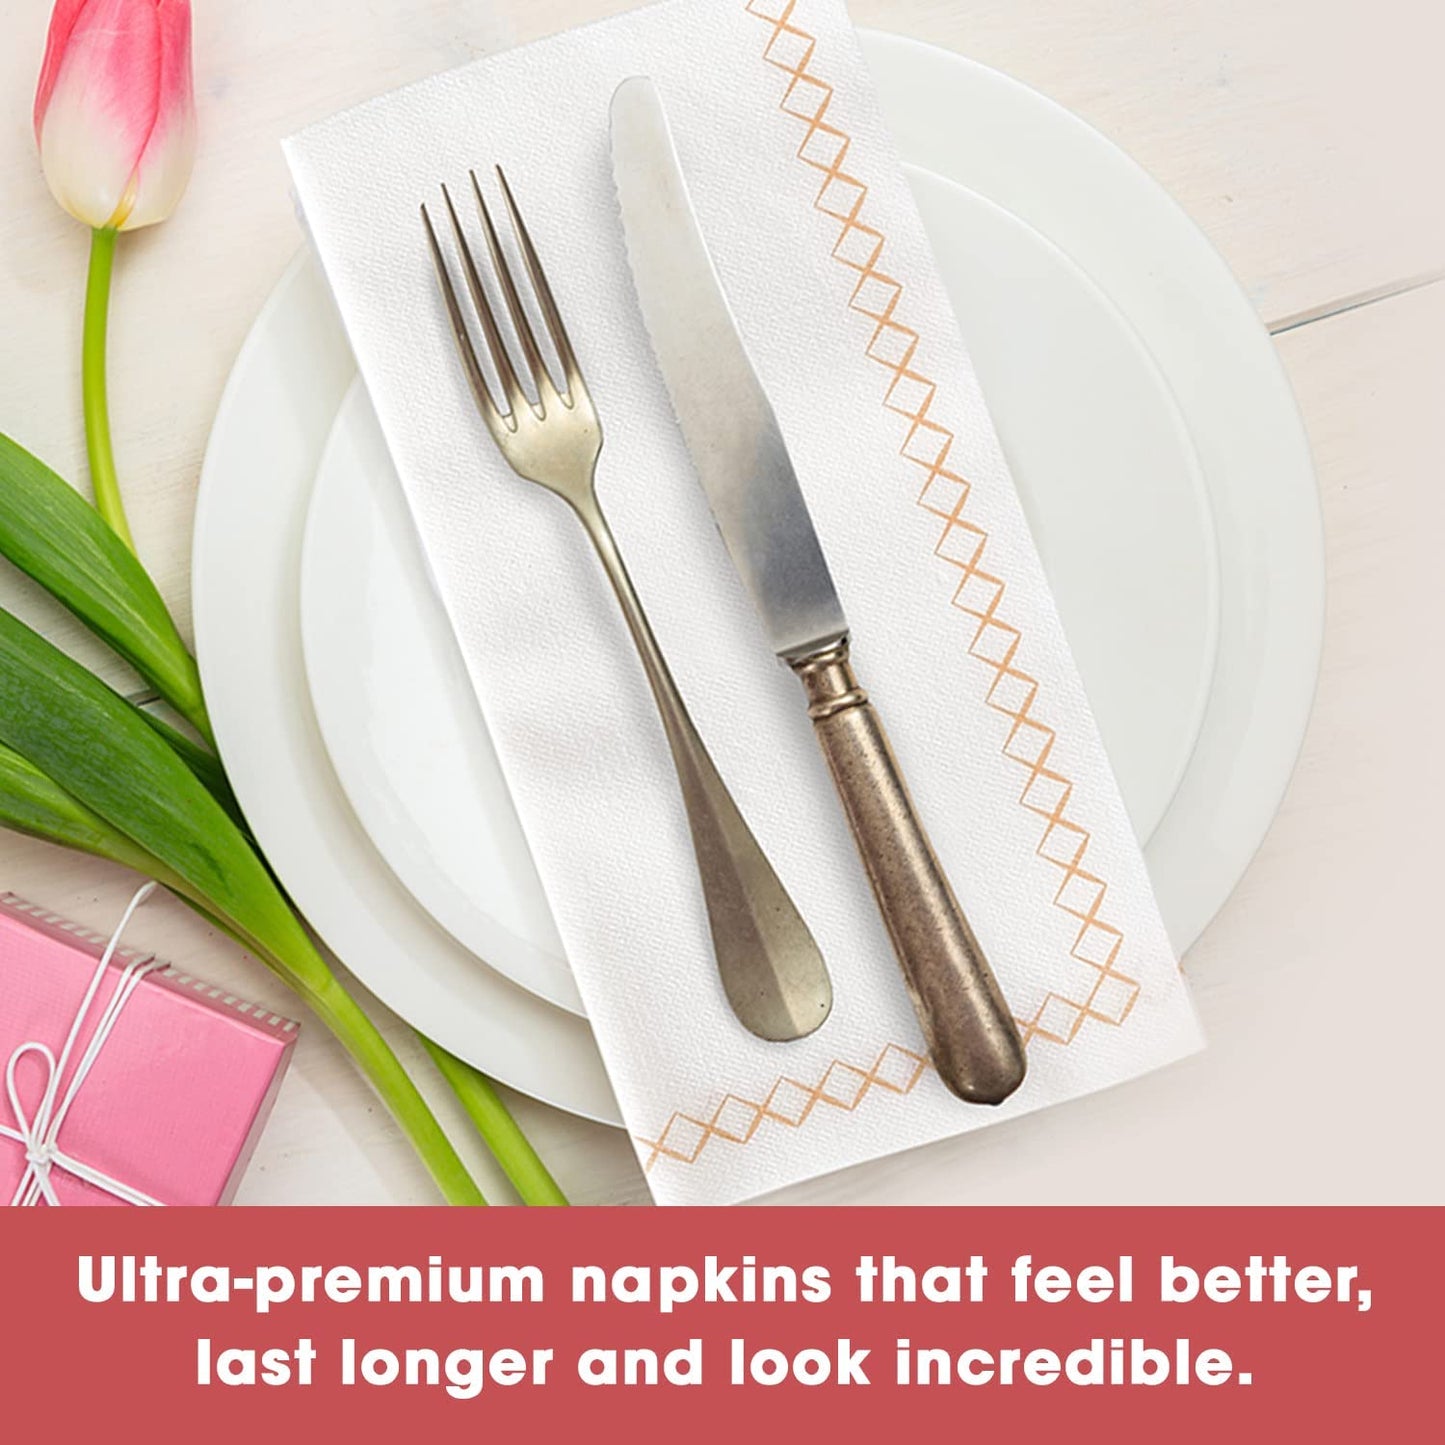 Fancy Paper Napkins - Perfect Disposable Guest Hand Towels for Bathrooms